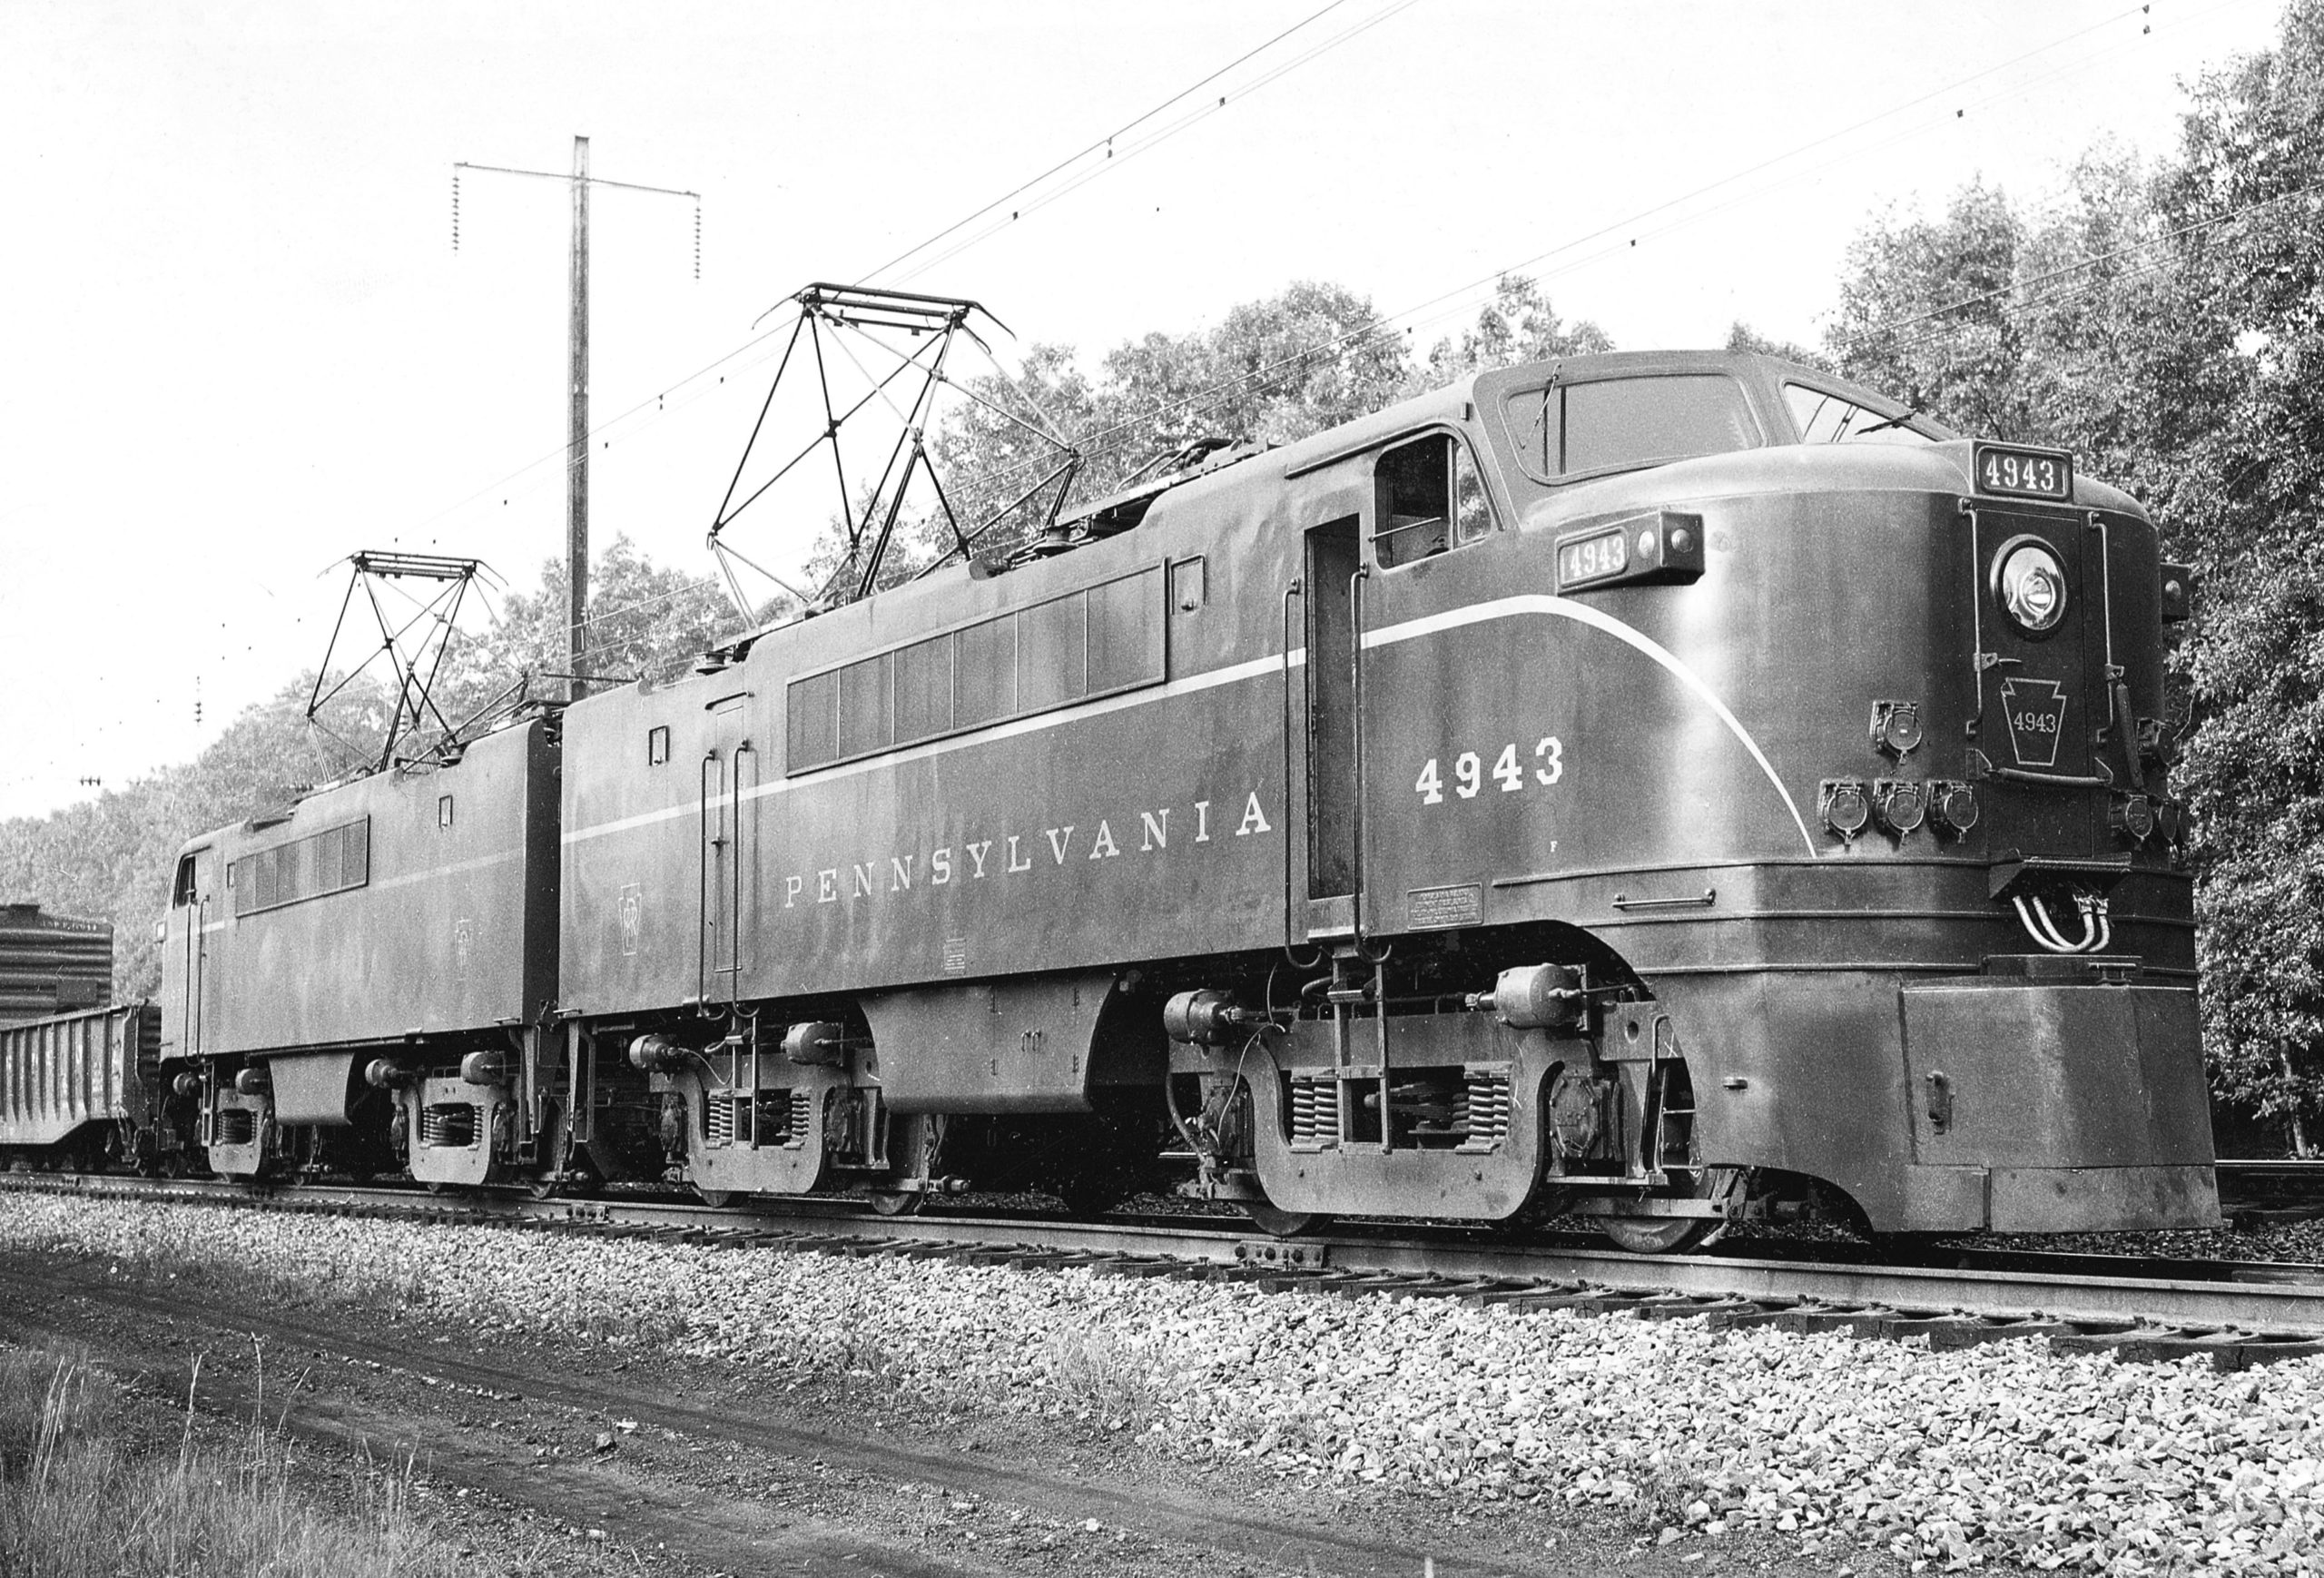 Two carbody-type streamlined electric freight locomotives